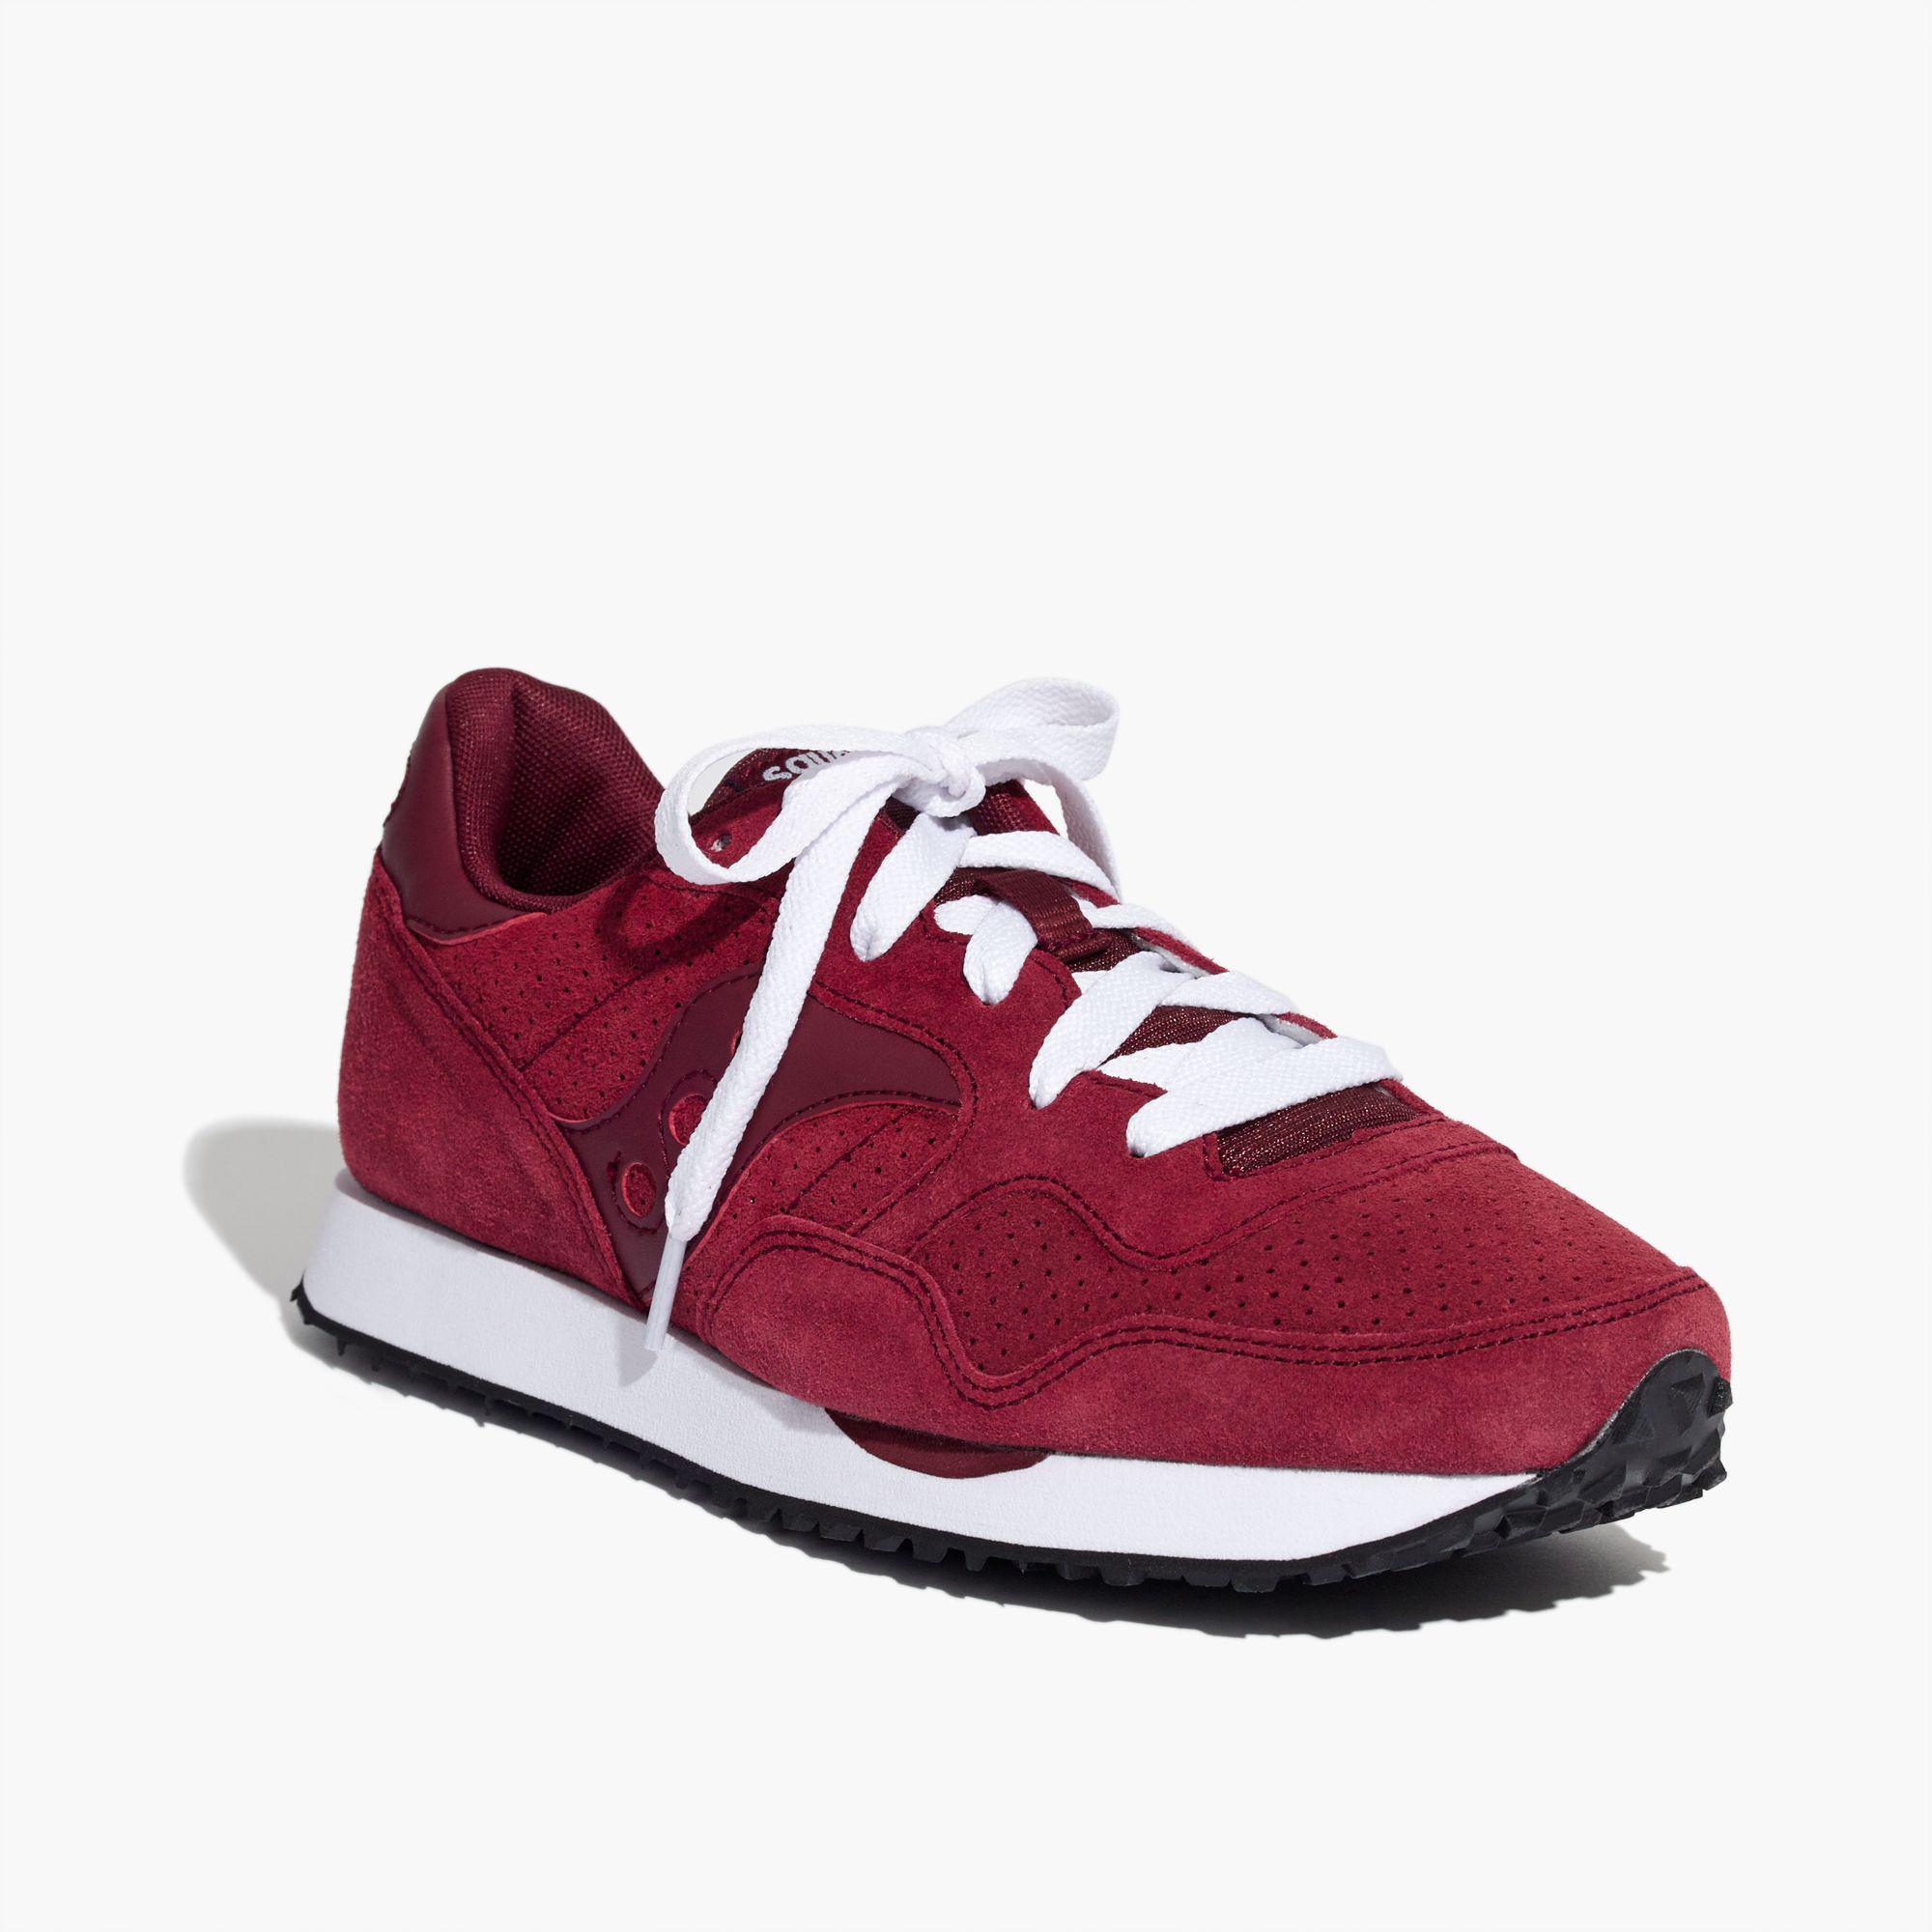 madewell and saucony dxn